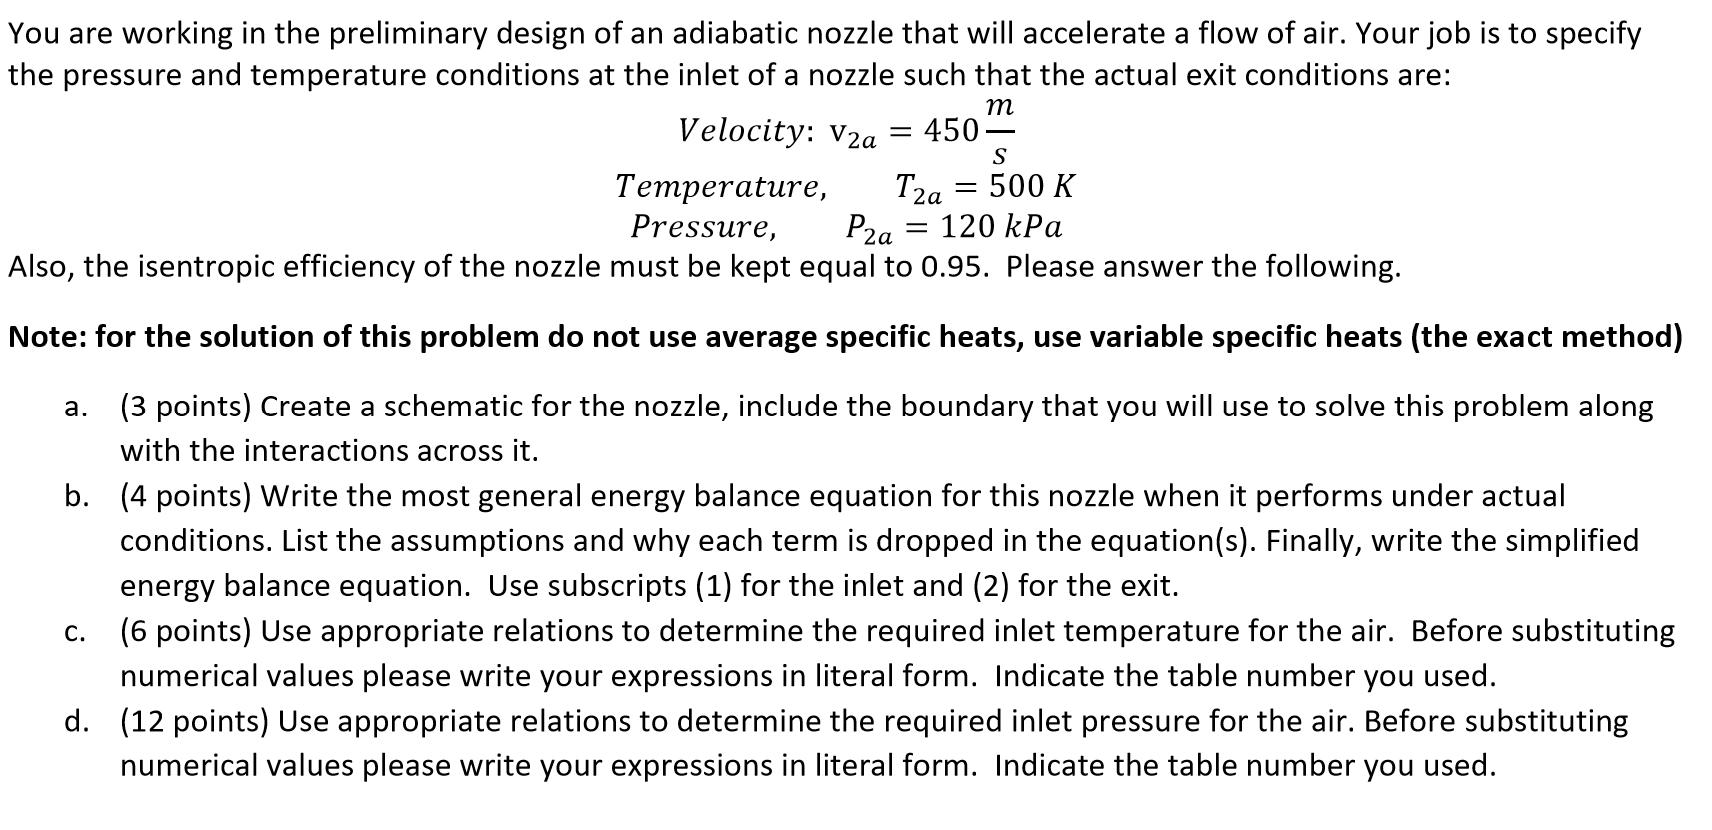 You are working in the preliminary design of an adiabatic nozzle that will accelerate a flow of air. Your job